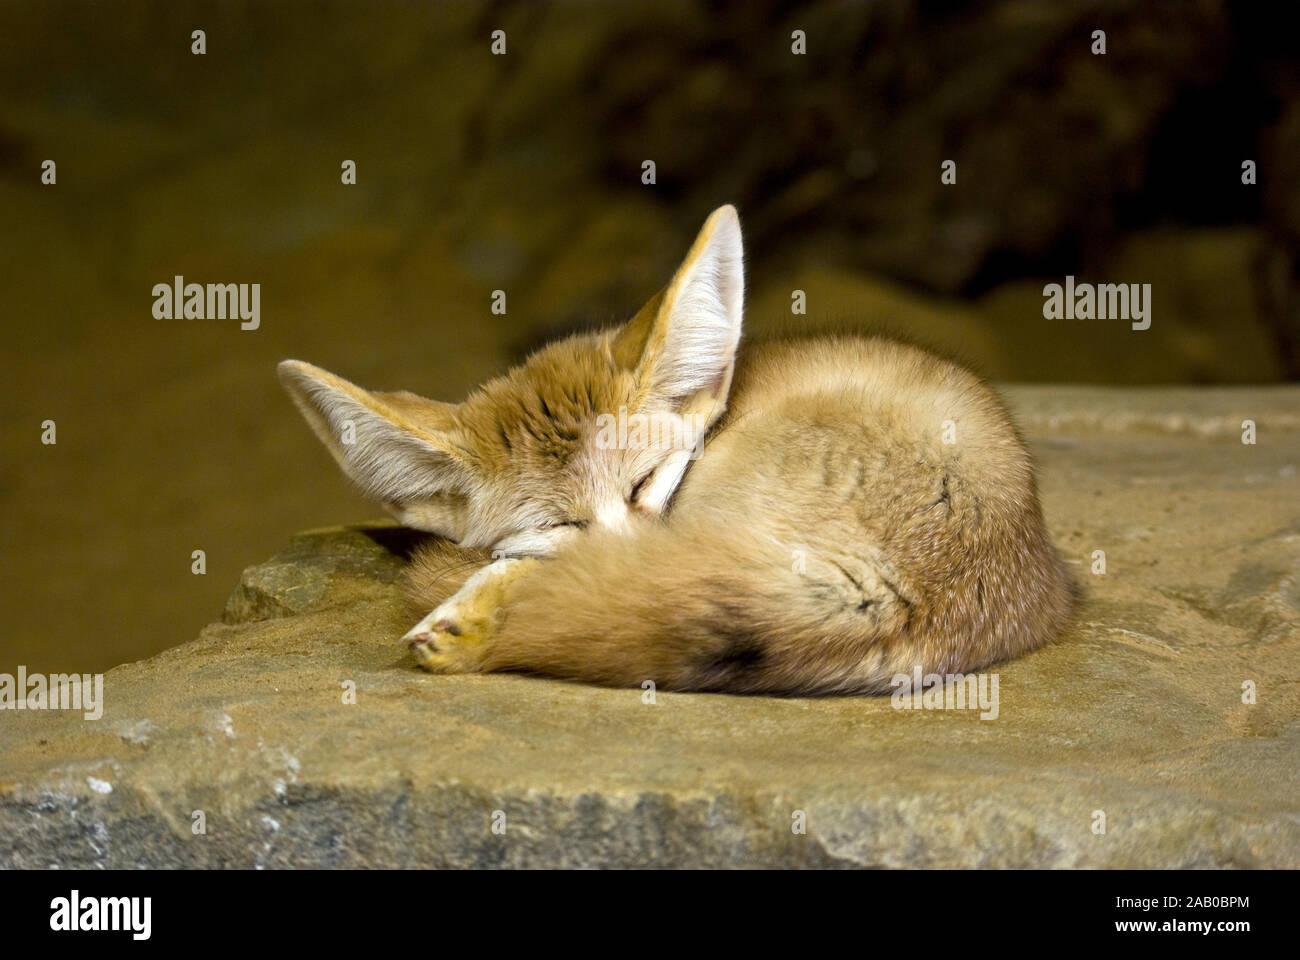 Who would have thought that big ears could be cute? This little fella takes a nap just after being fed. Stock Photo